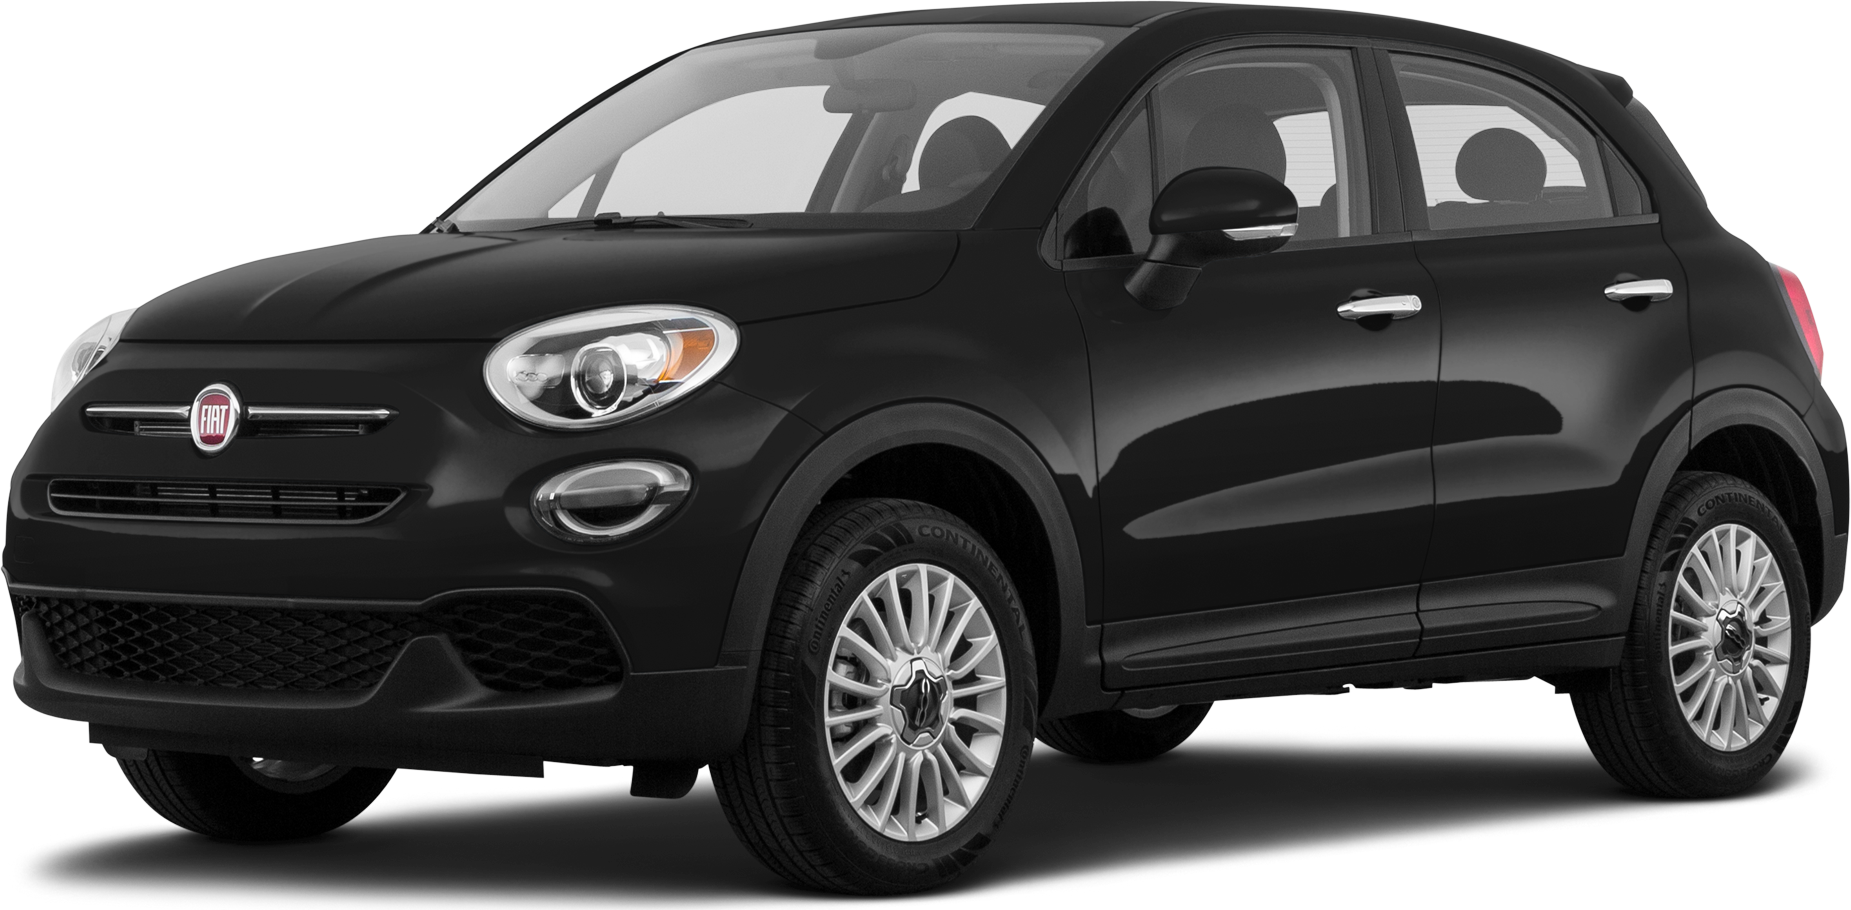 2022 Fiat 500X Review, Pricing, and Specs